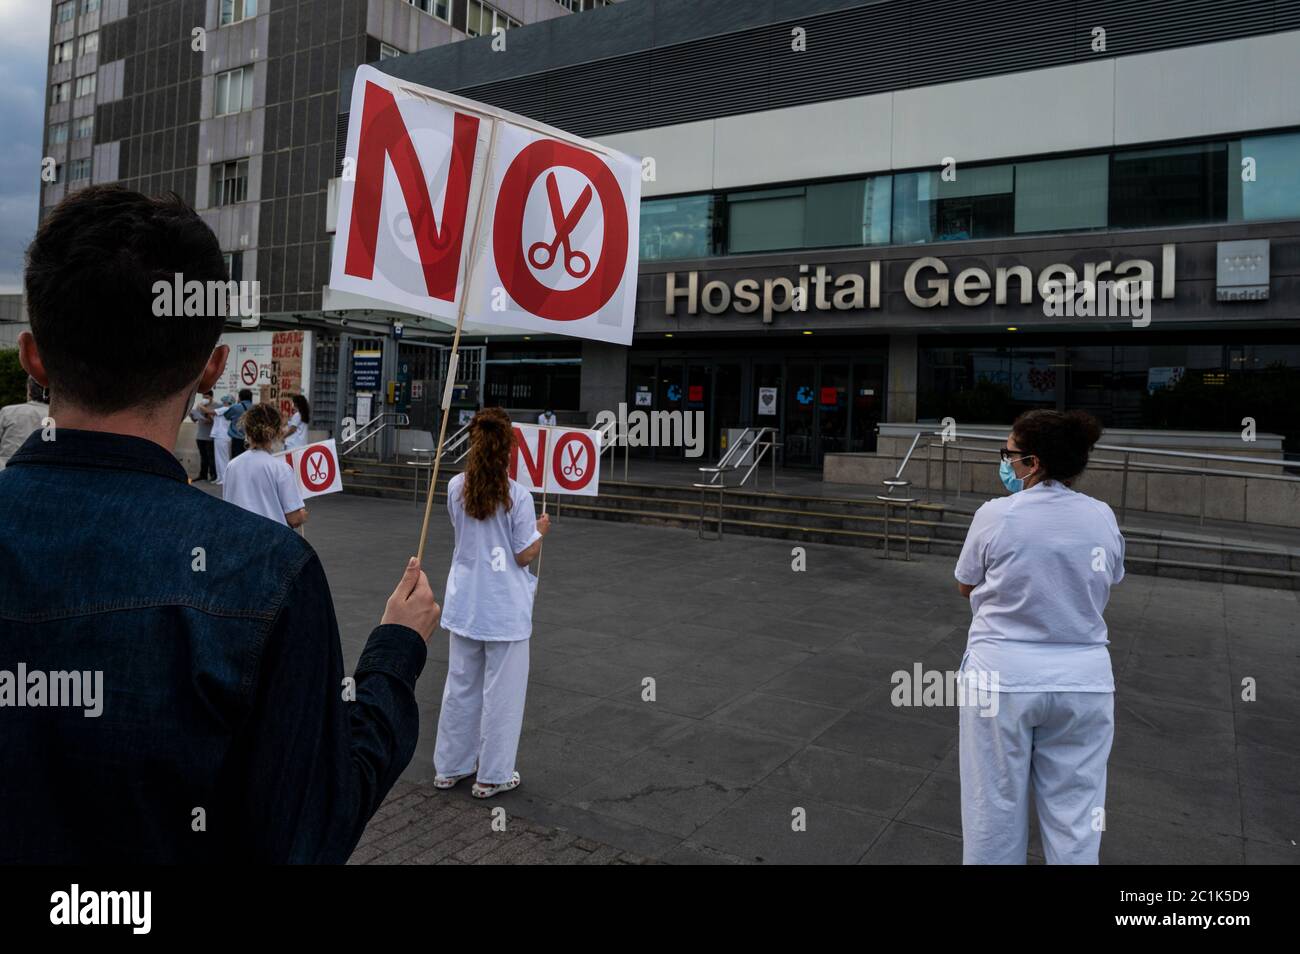 Madrid, Spain. 15th June, 2020. Madrid, Spain. June 15, 2020. Healthcare workers protesting in La Paz Hospital coinciding with the World Elder Abuse Awareness Day. Healthcare workers are carrying out protests in Hospitals during the coronavirus crisis against the precariousness of their work. Credit: Marcos del Mazo/Alamy Live News Stock Photo